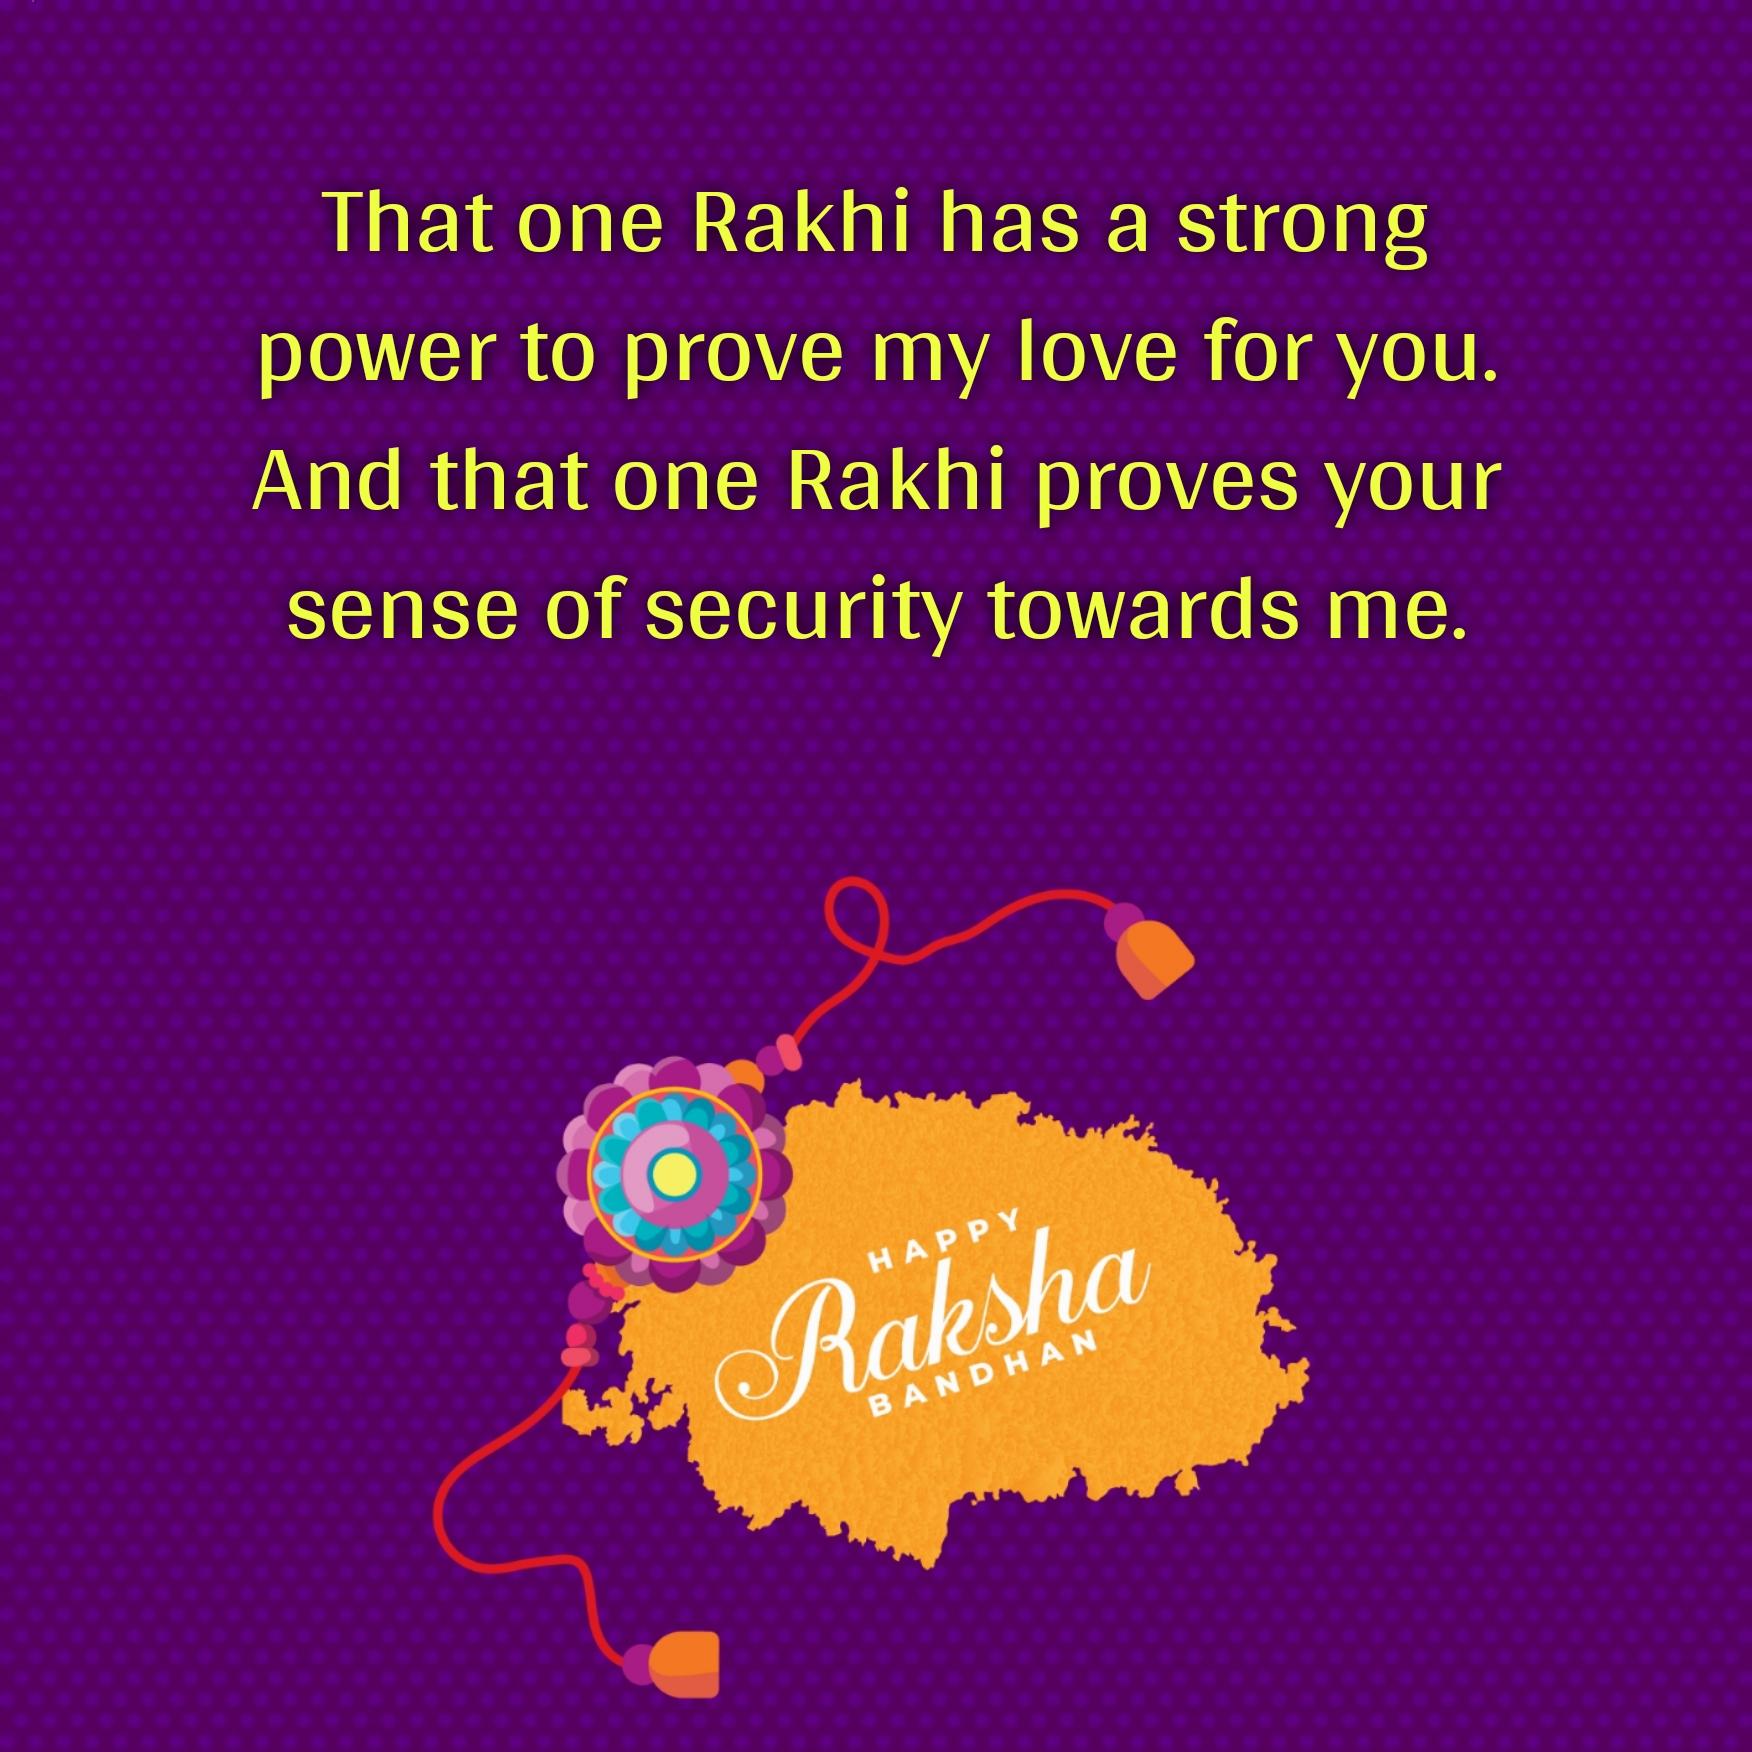 That one Rakhi has a strong power to prove my love for you